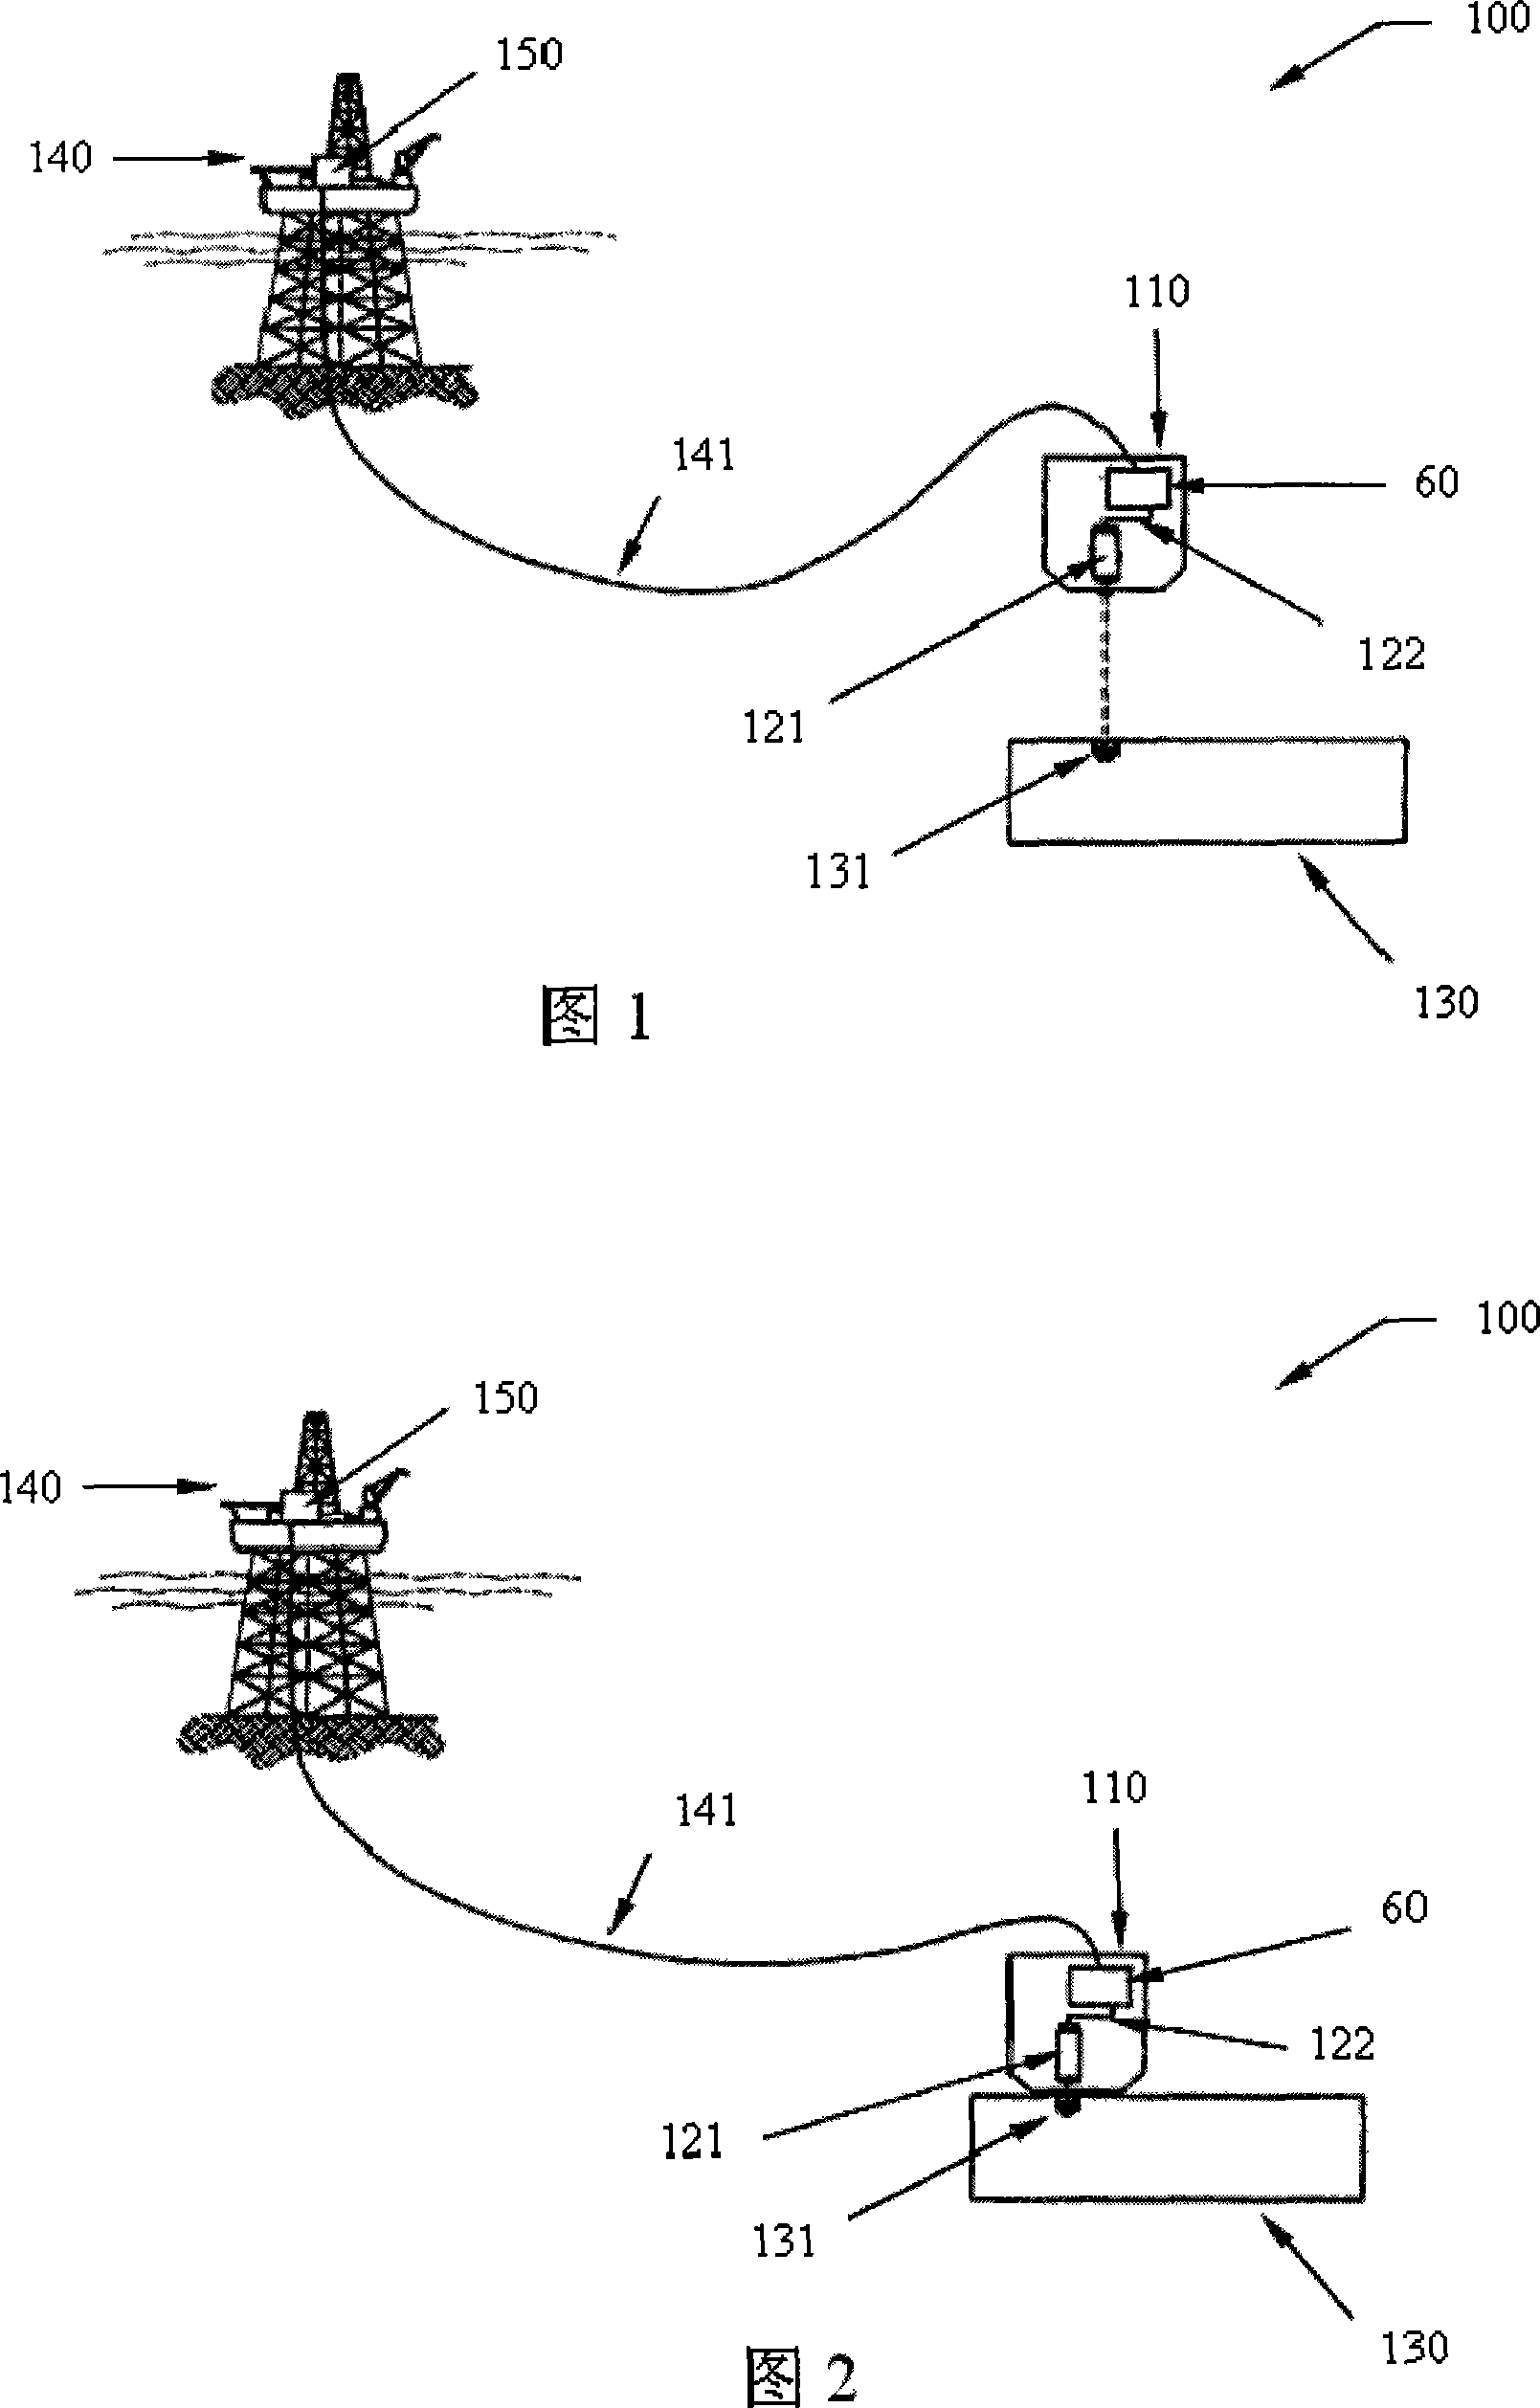 Control system for seabed processing system